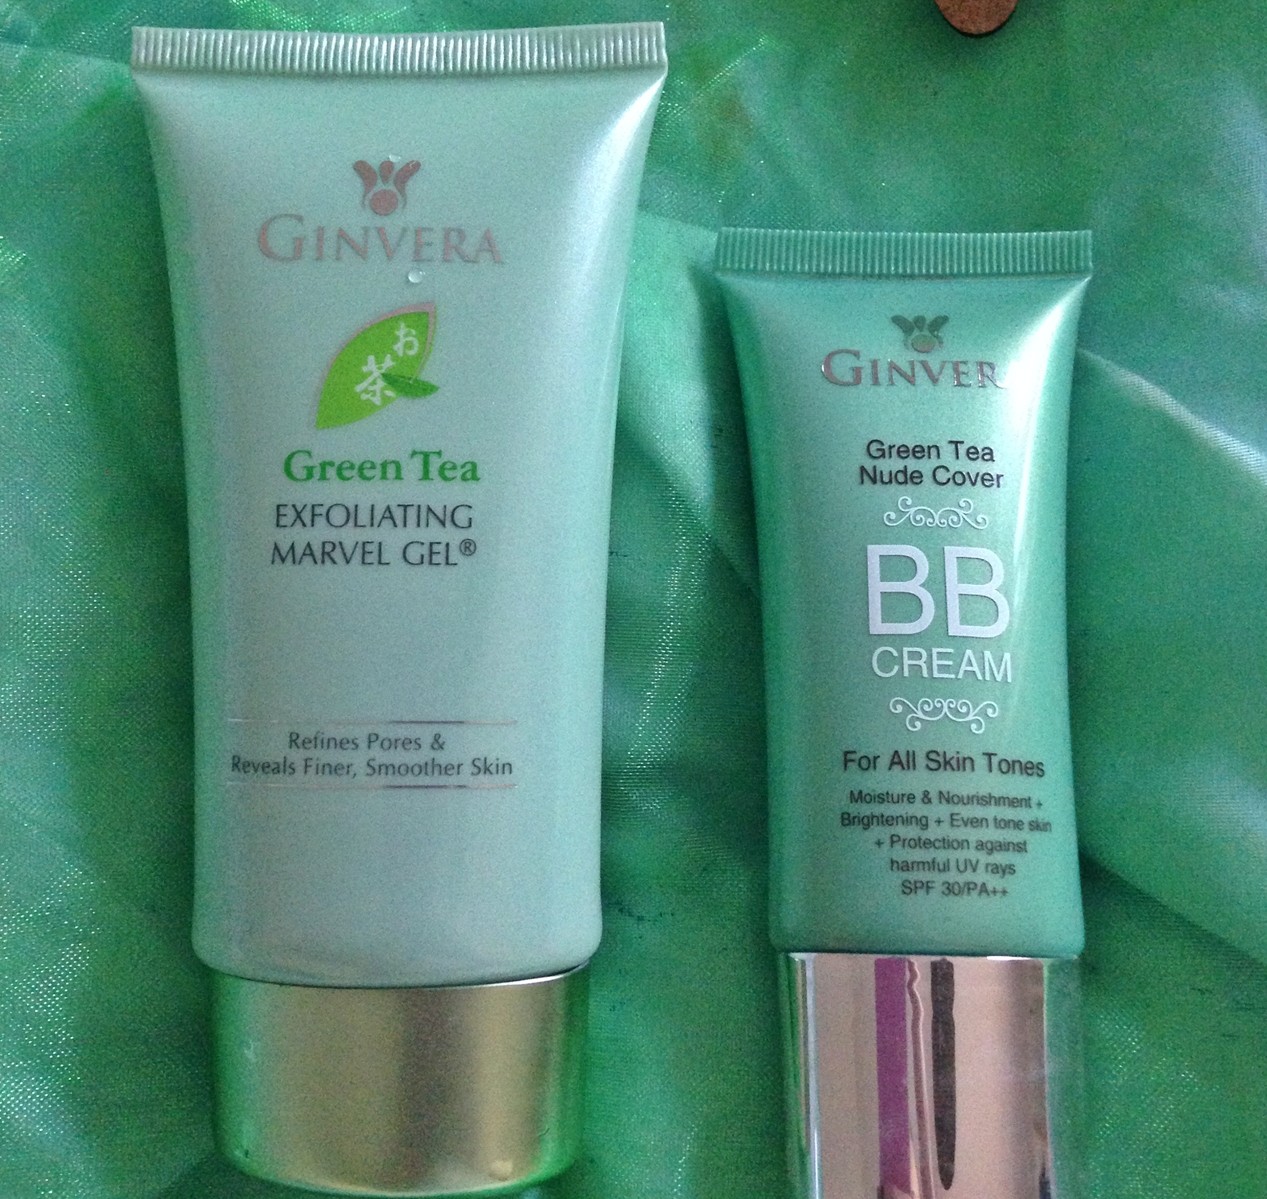 Ginvera Green Tea Product Review